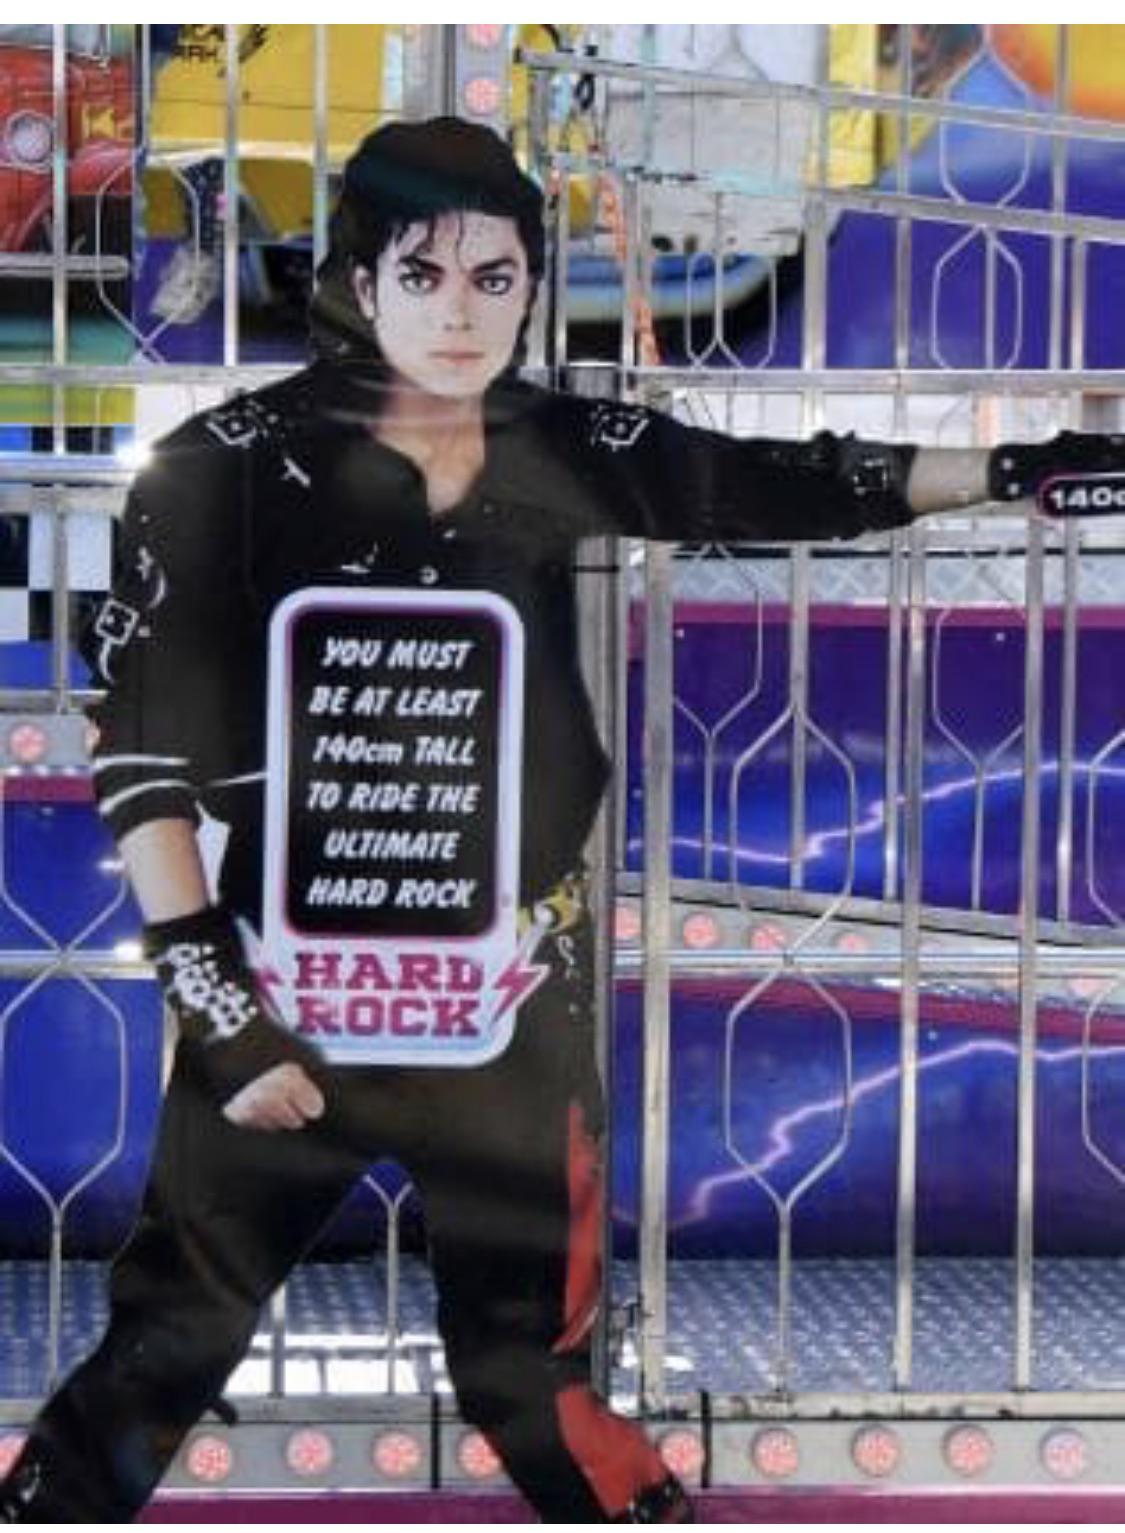 cool - 140 You Must Be At Least 140cm Tall To Ride The Ultimate Hard Rock Hard Rock